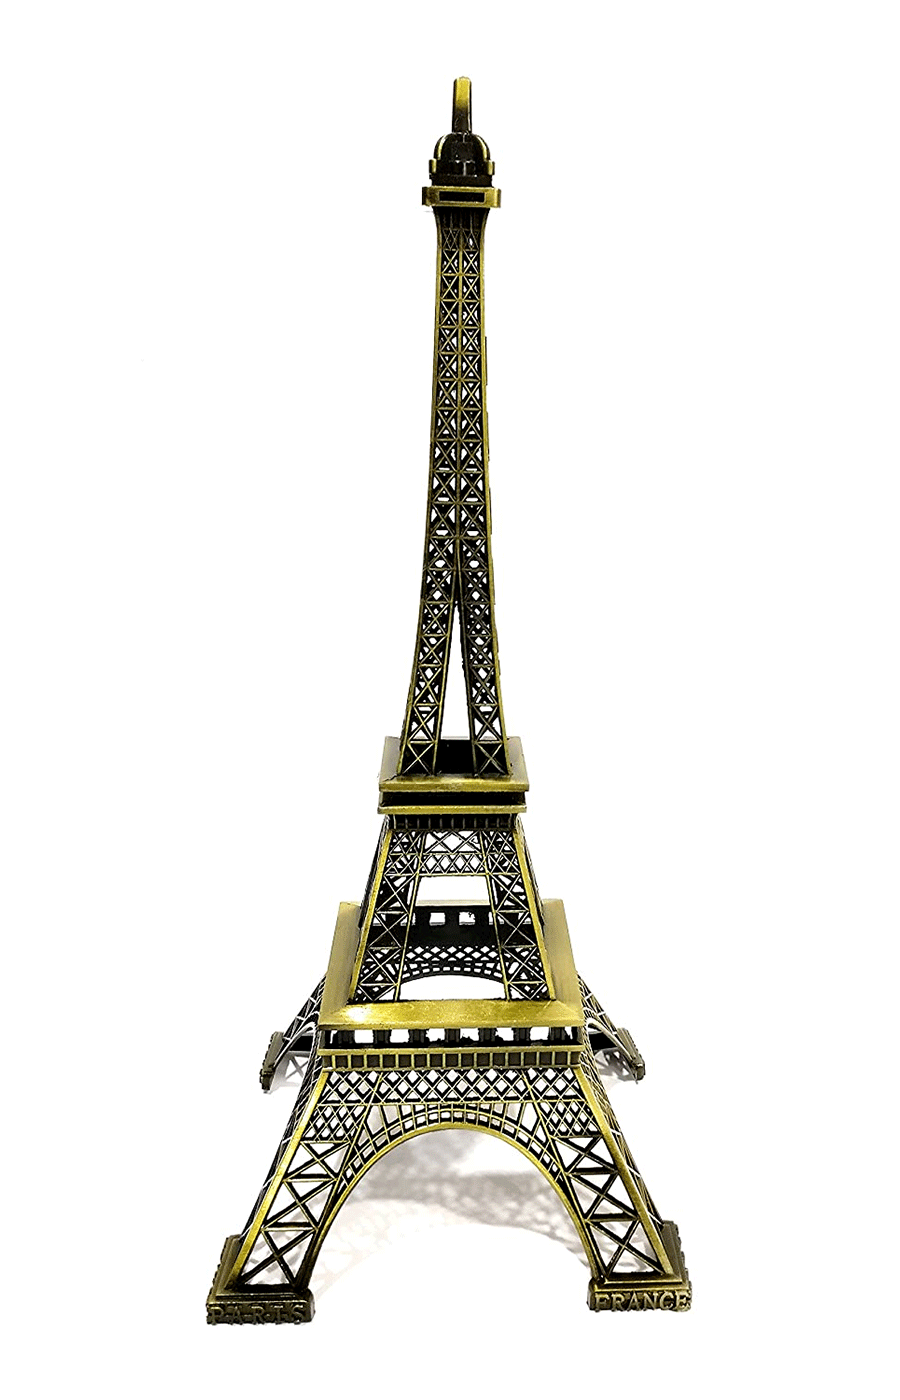 FunkyTradition 16 cm Tall Eiffel Tower Statue Metal Showpiece | Birthday and Home Office Decor 6" Tall